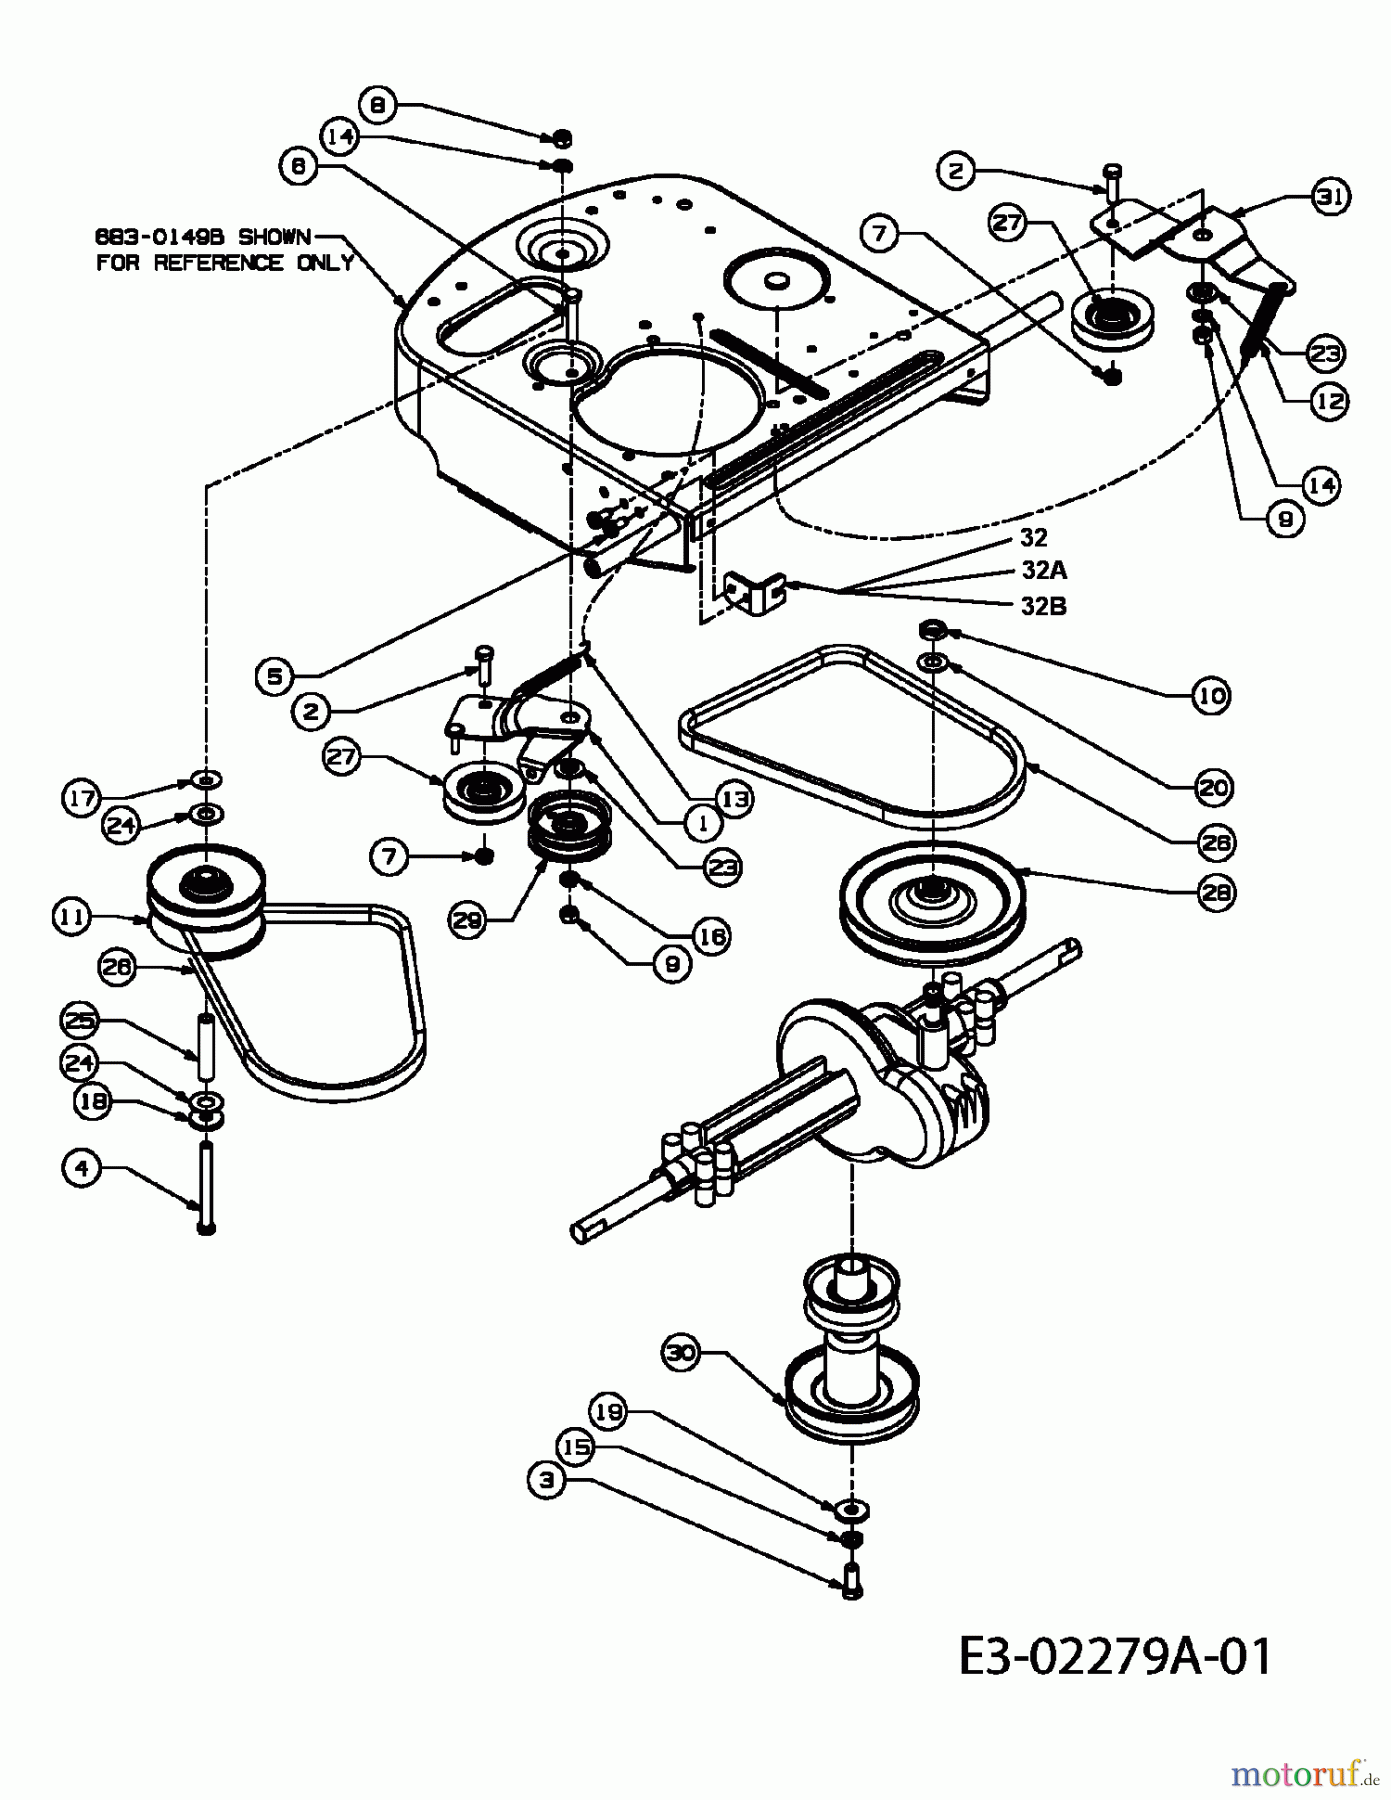  Yard-Man Lawn tractors DX 70 13B-334-643  (2005) Drive system, Engine pulley